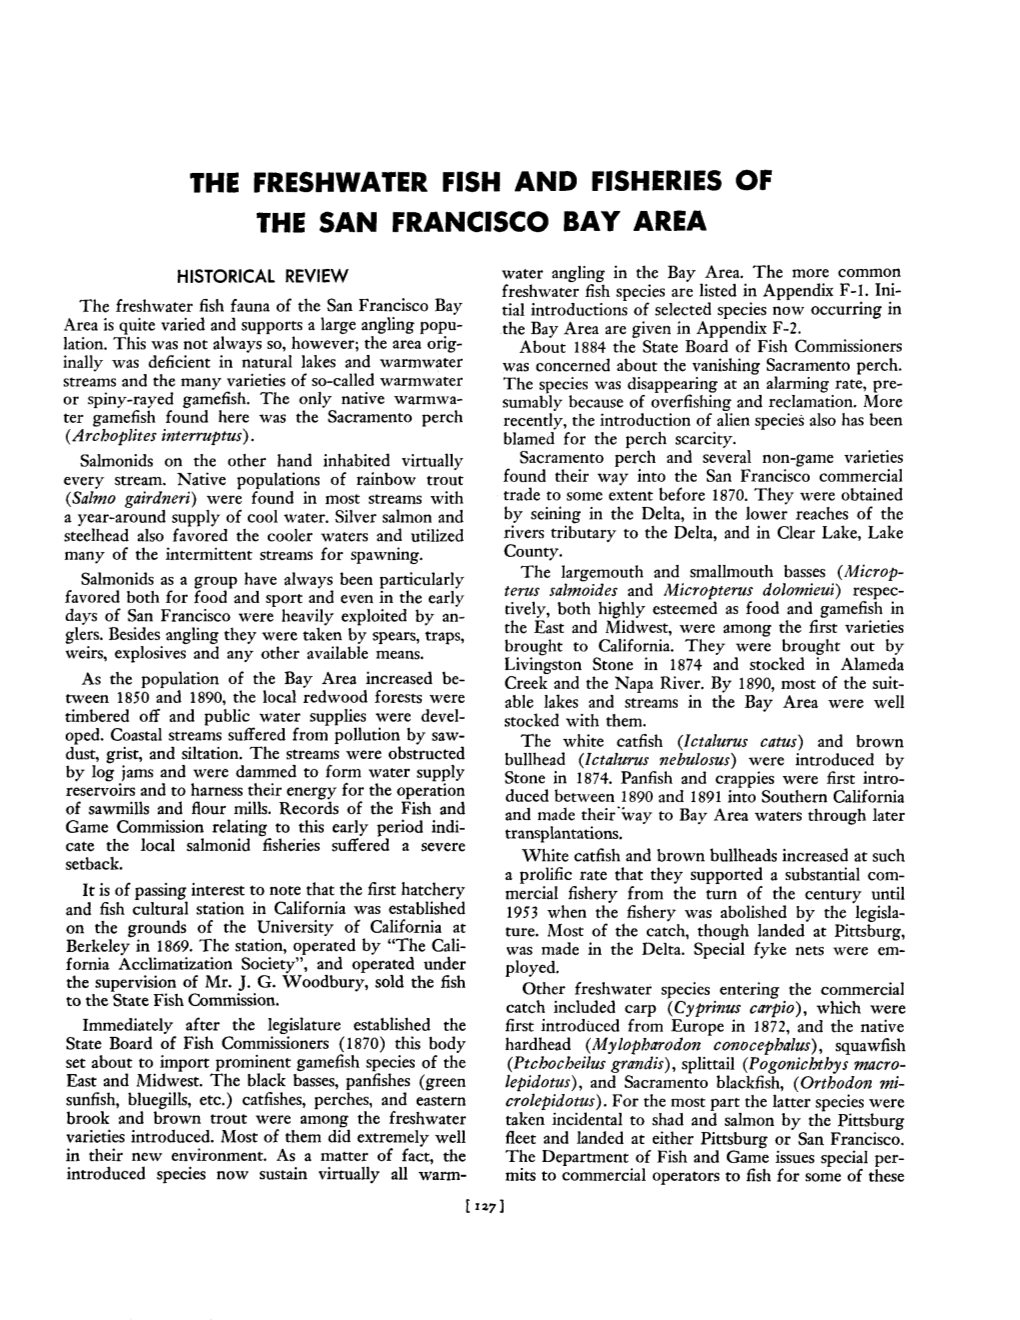 An Historical Review of the Fish and Wildlife Resources of the San